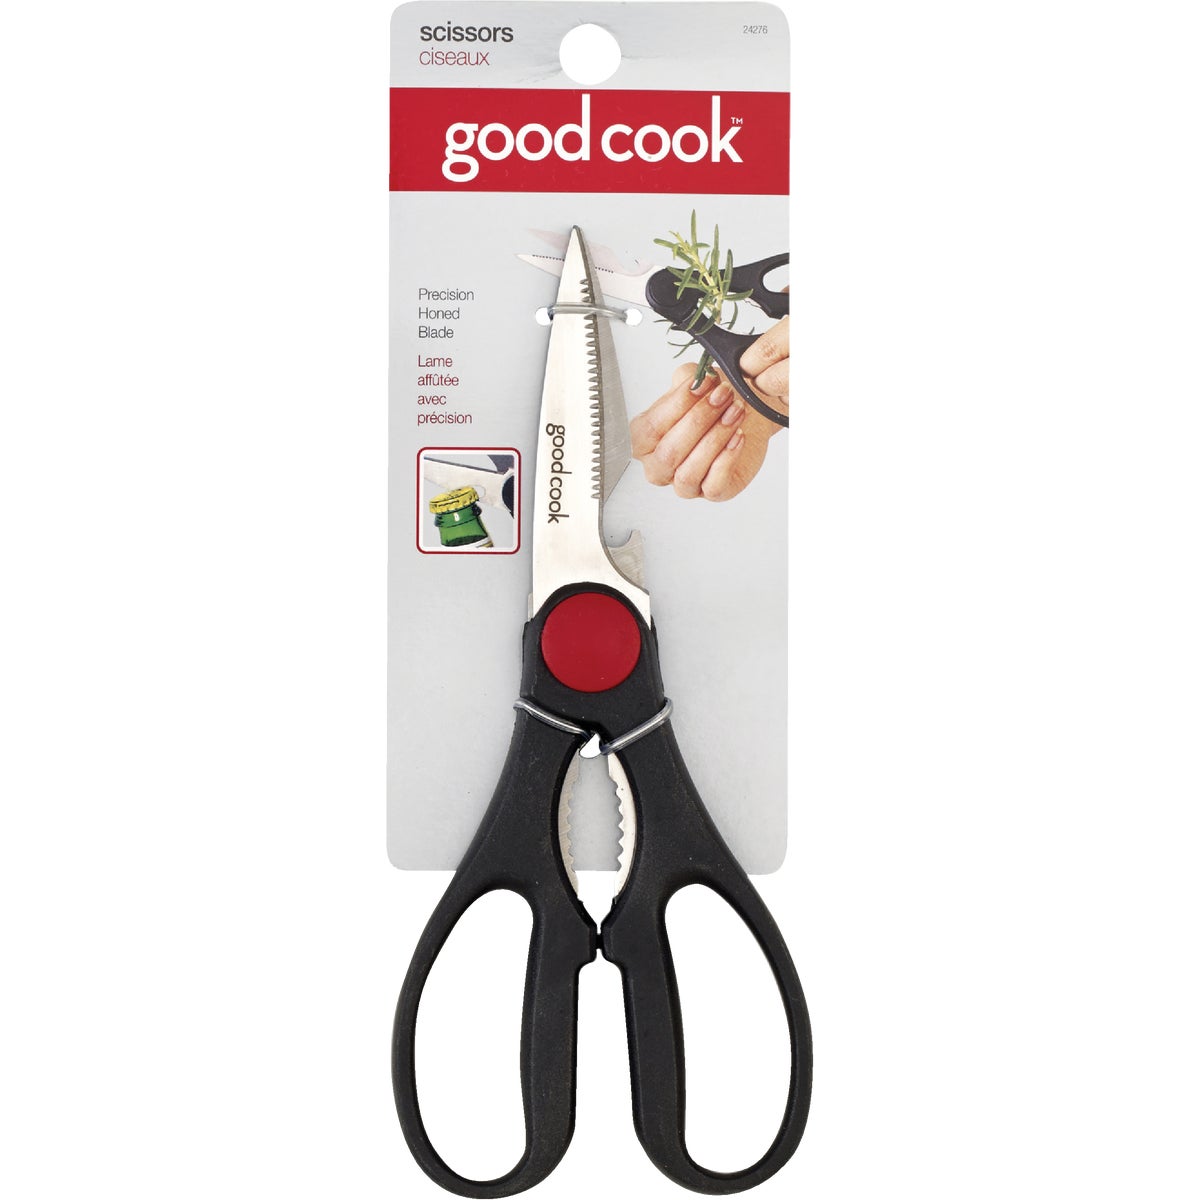 Item 619936, Gourmet Stainless Steel Shears for chopping herbs, cutting pizza, prepping 